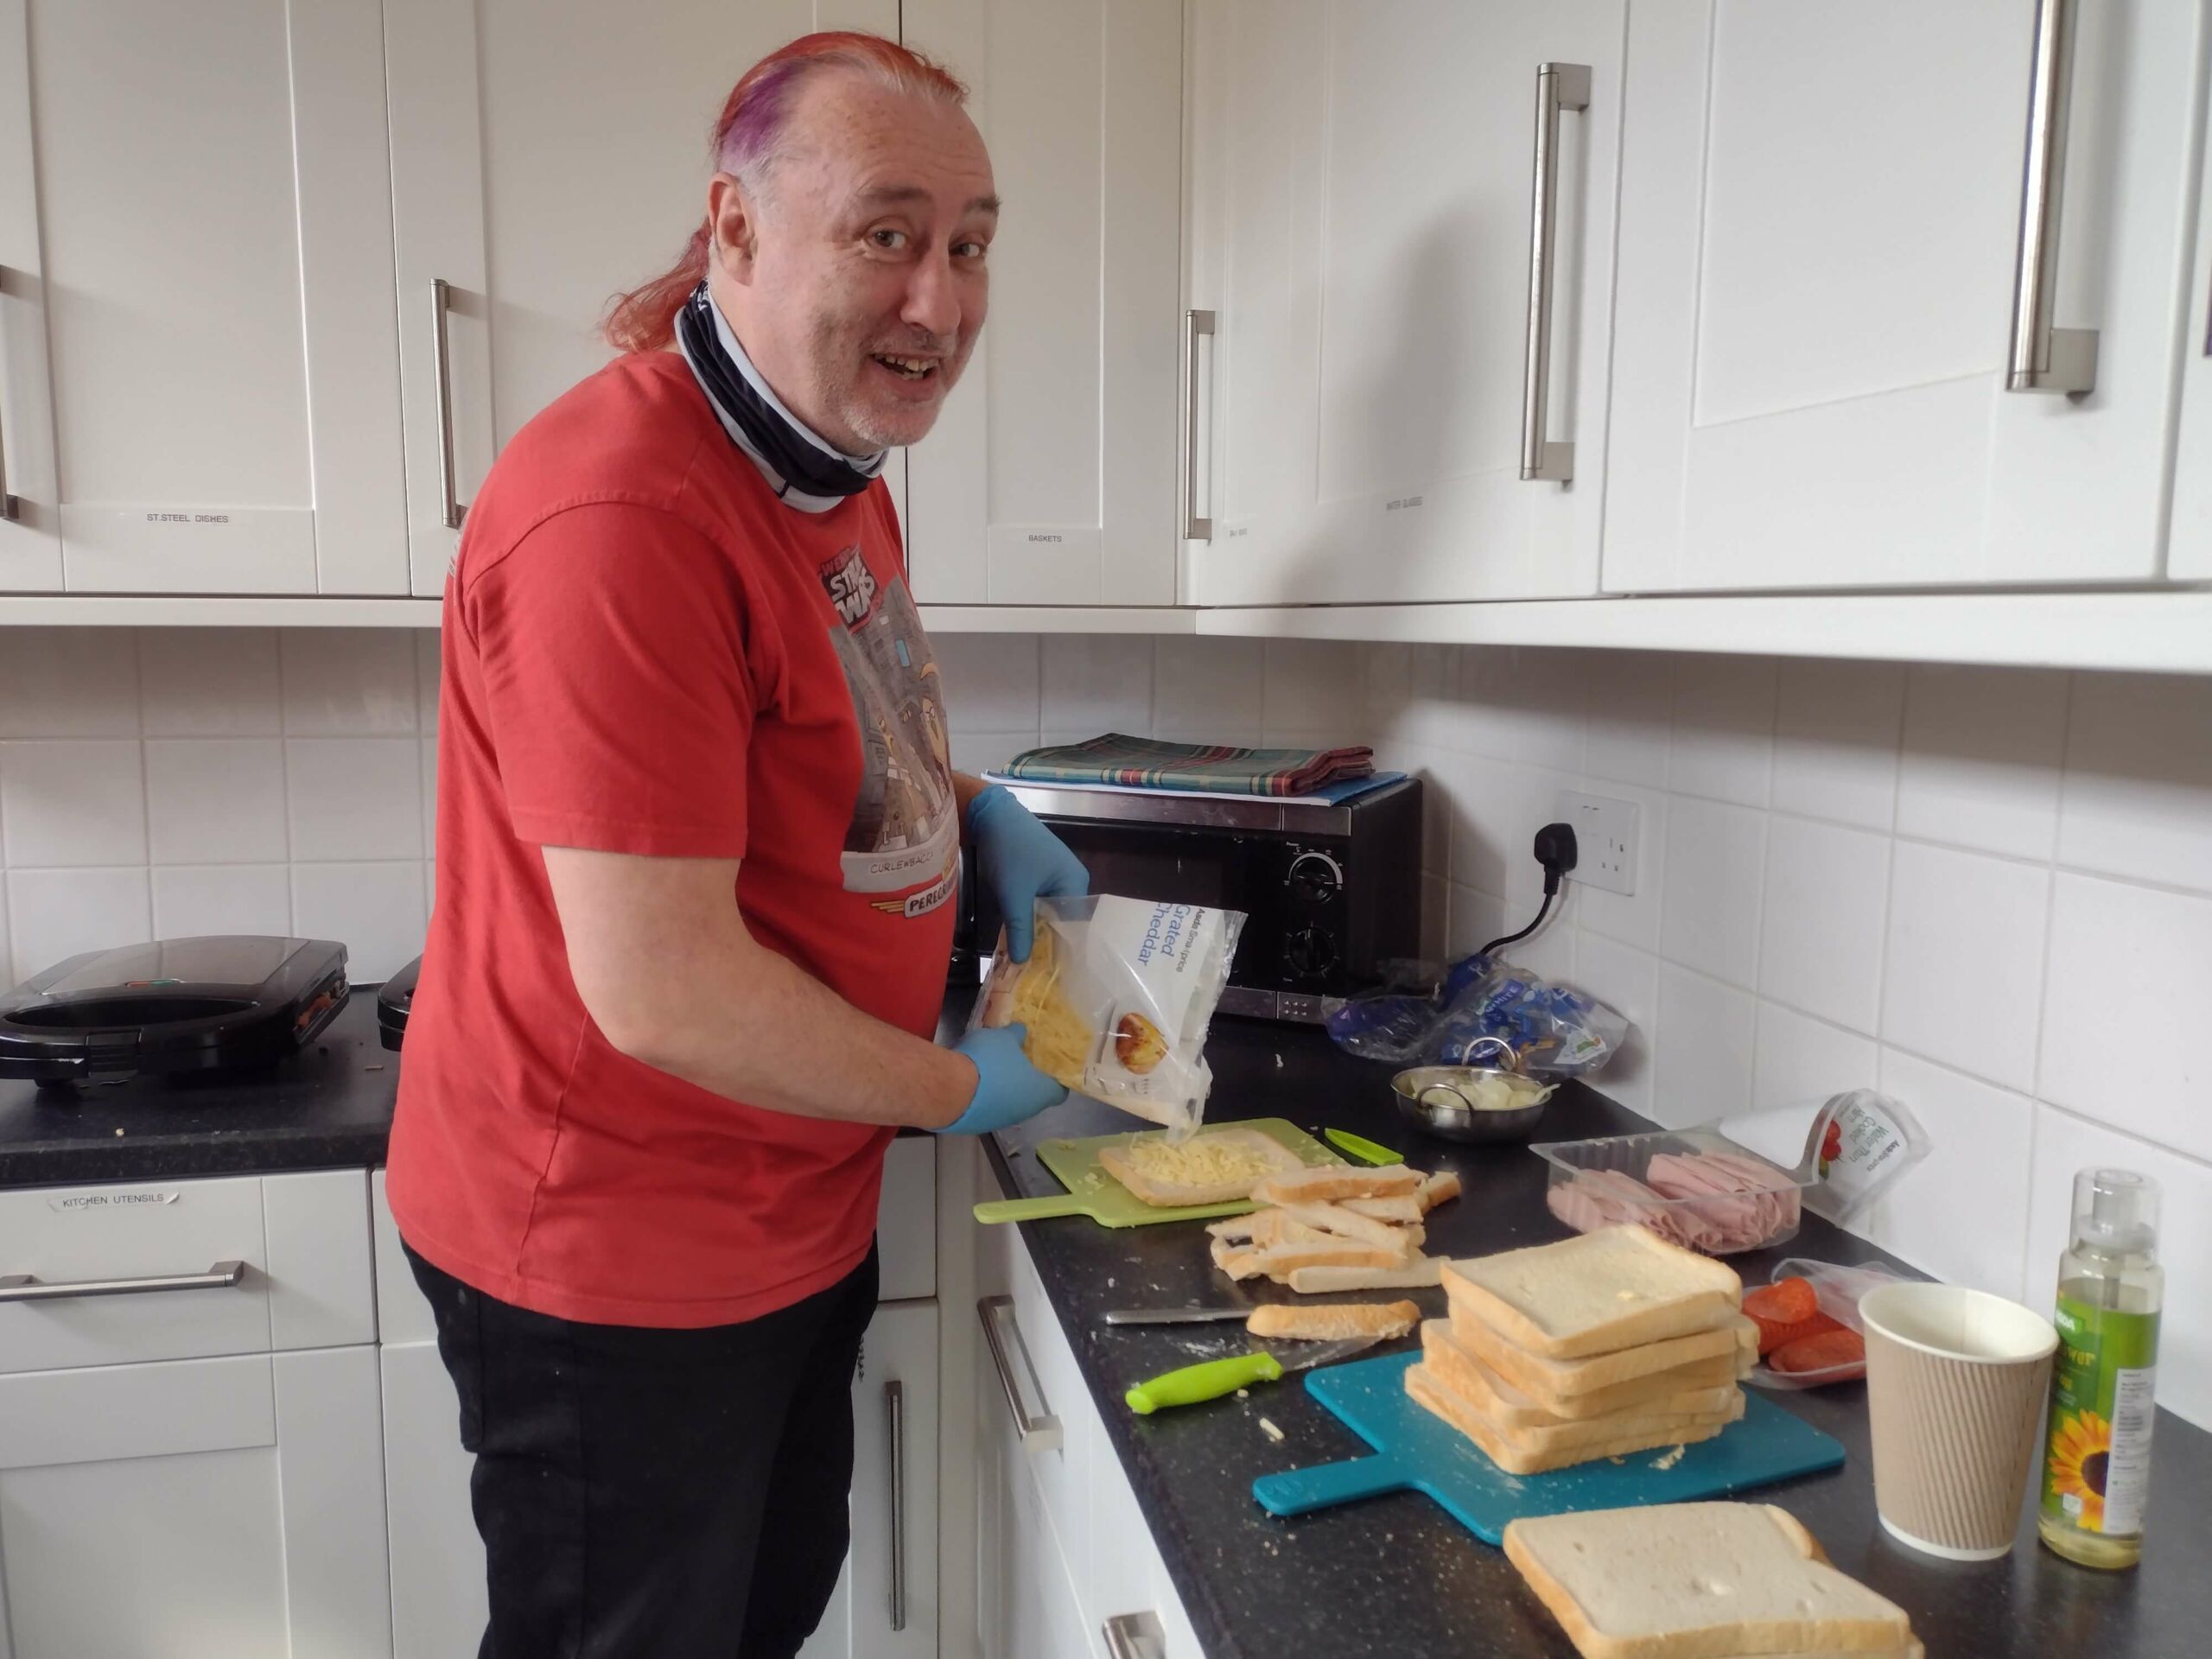 Man in recovery in kitchen making a toastie